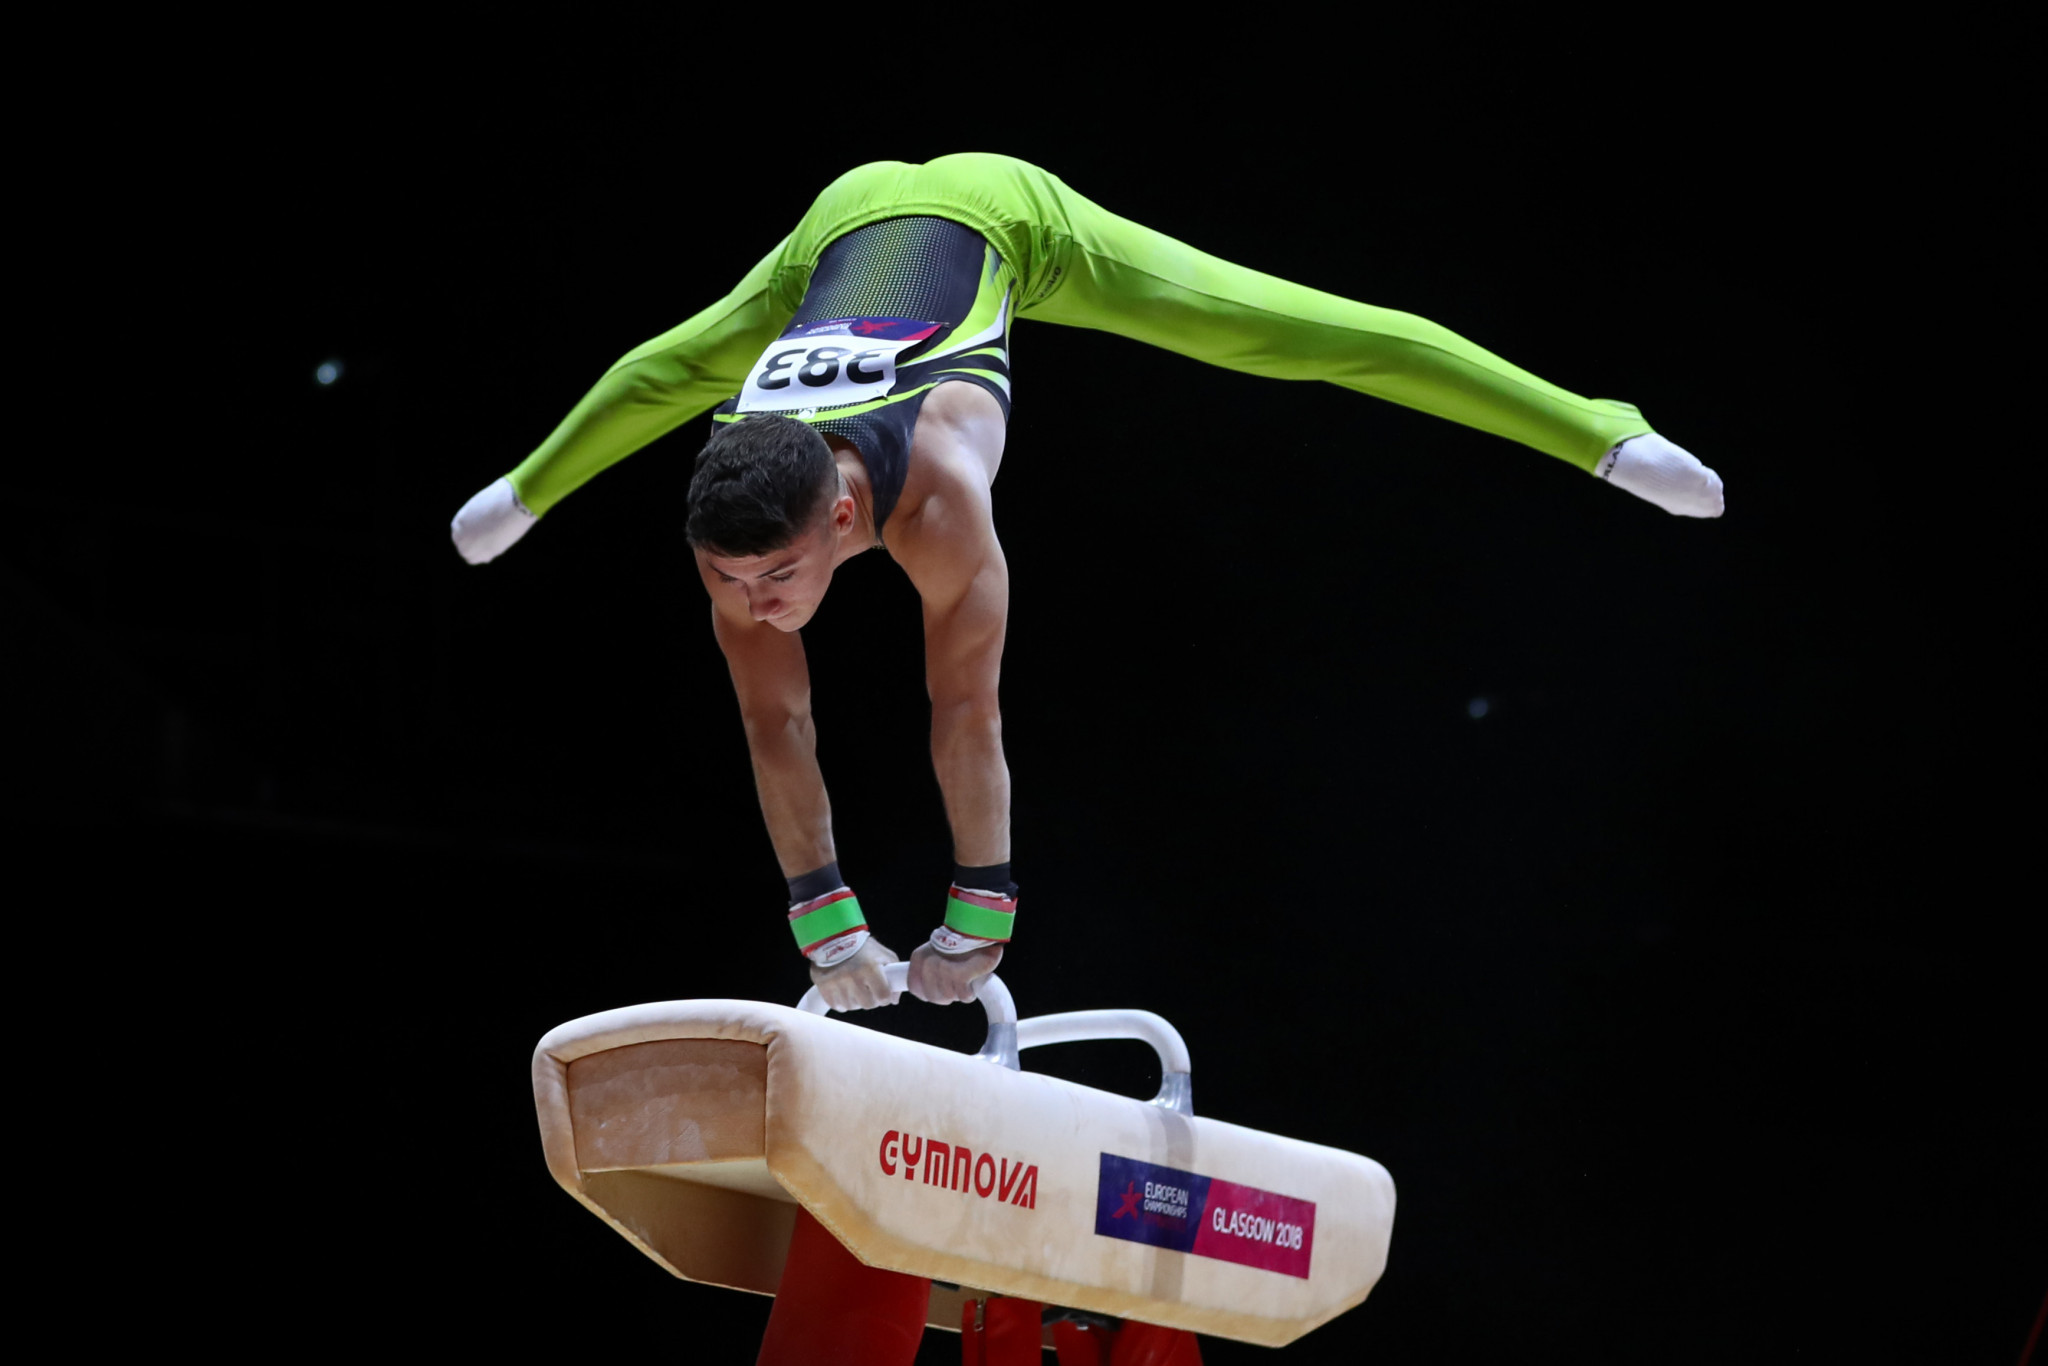 Commonwealth Games and European champion Rhys McClenaghan of Ireland produced a superb display to claim the gold medal in the pommel horse ©Getty Images